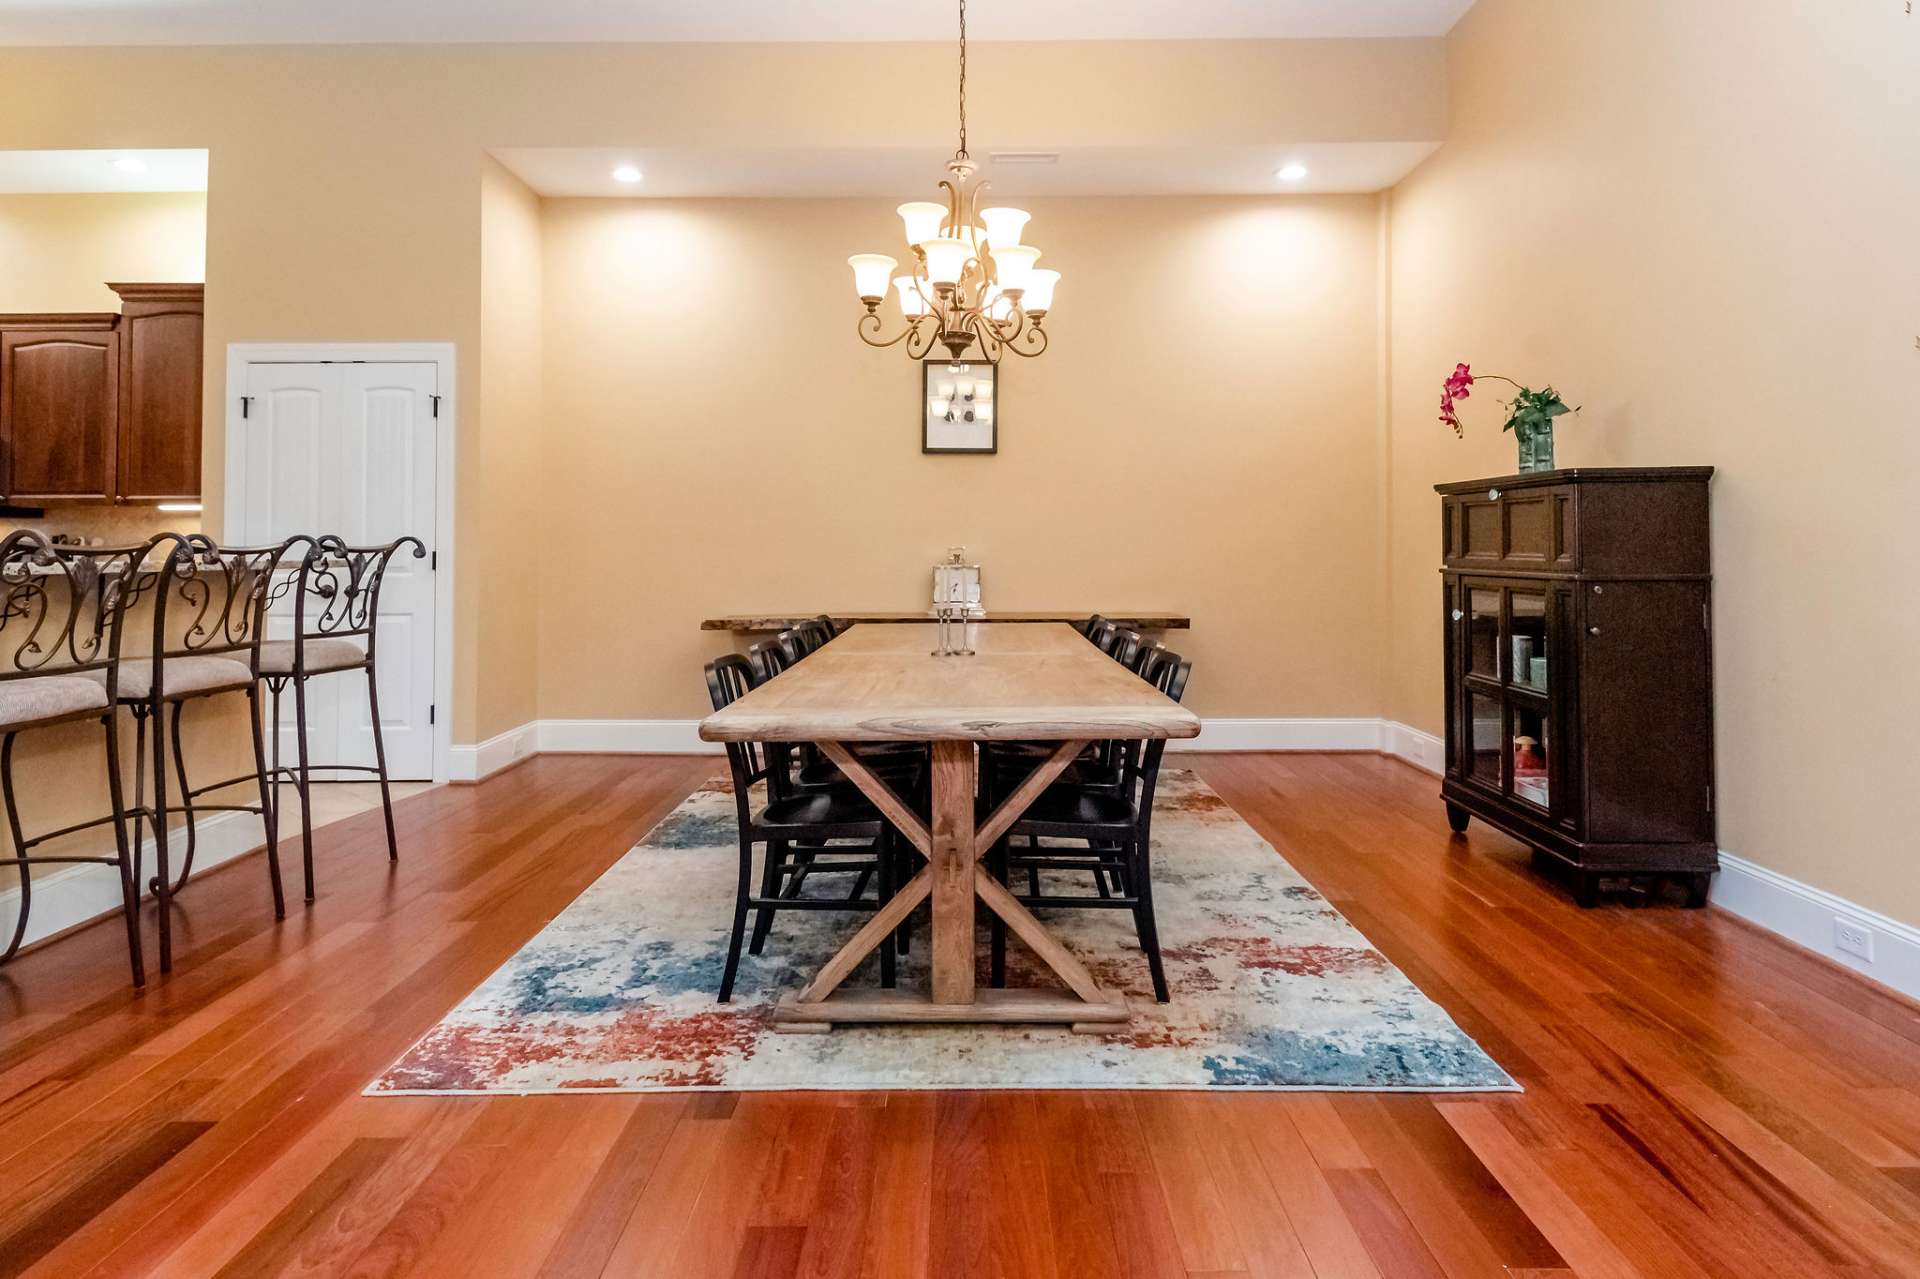 Dining area is spacious for guests.